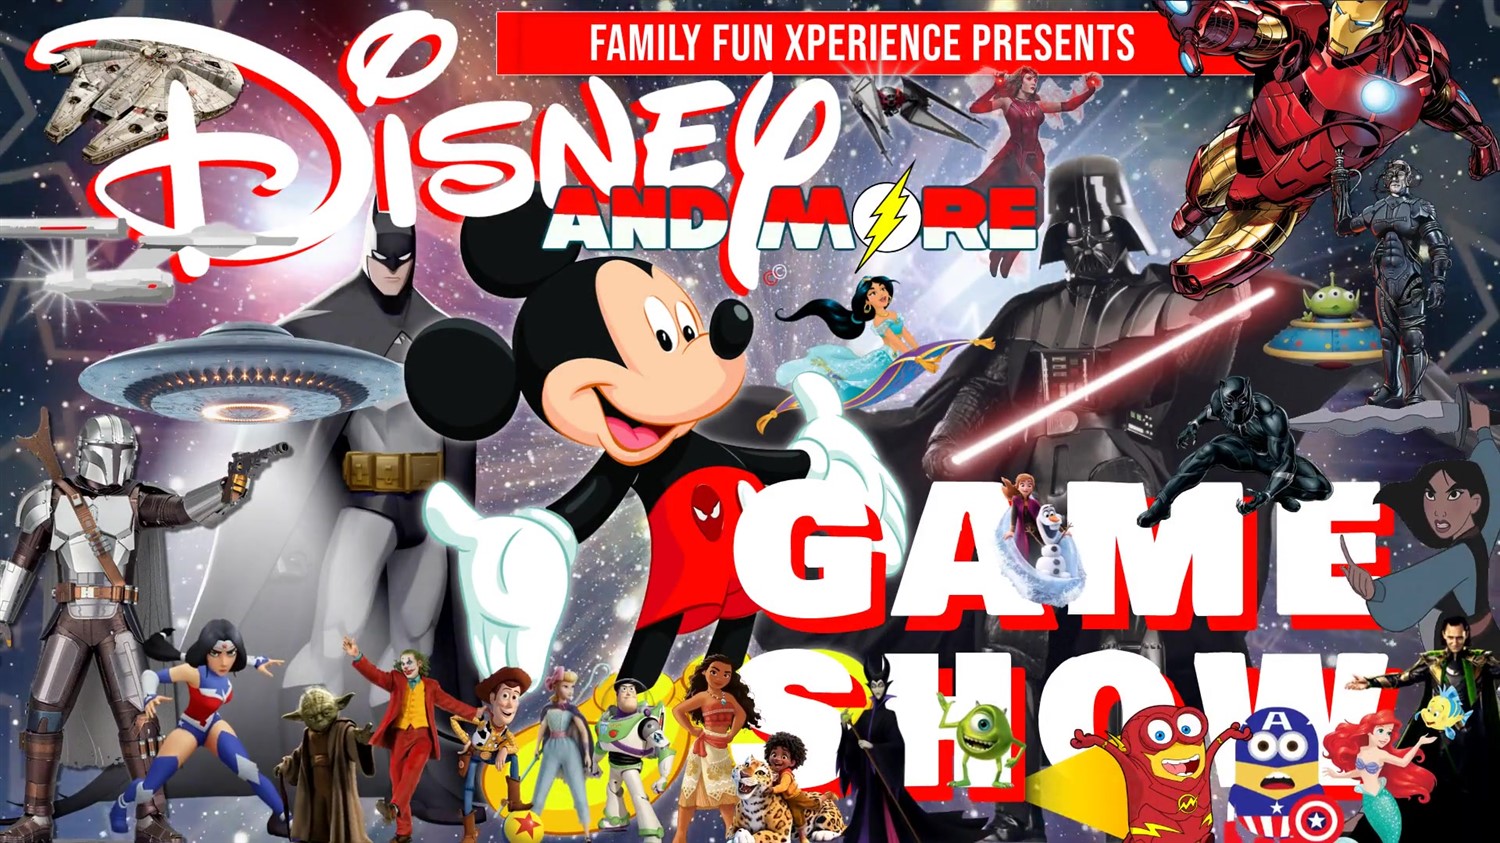 DISNEY, SUPERHEROES, & SCI-FI LIVE GAME SHIOW Animation & Movies, Superheroes & Villains, plus Sci-Fi & More! on Jul 13, 19:00@FFX Theatre - Pick a seat, Buy tickets and Get information on Family Fun Xperience tickets.ffxshow.org